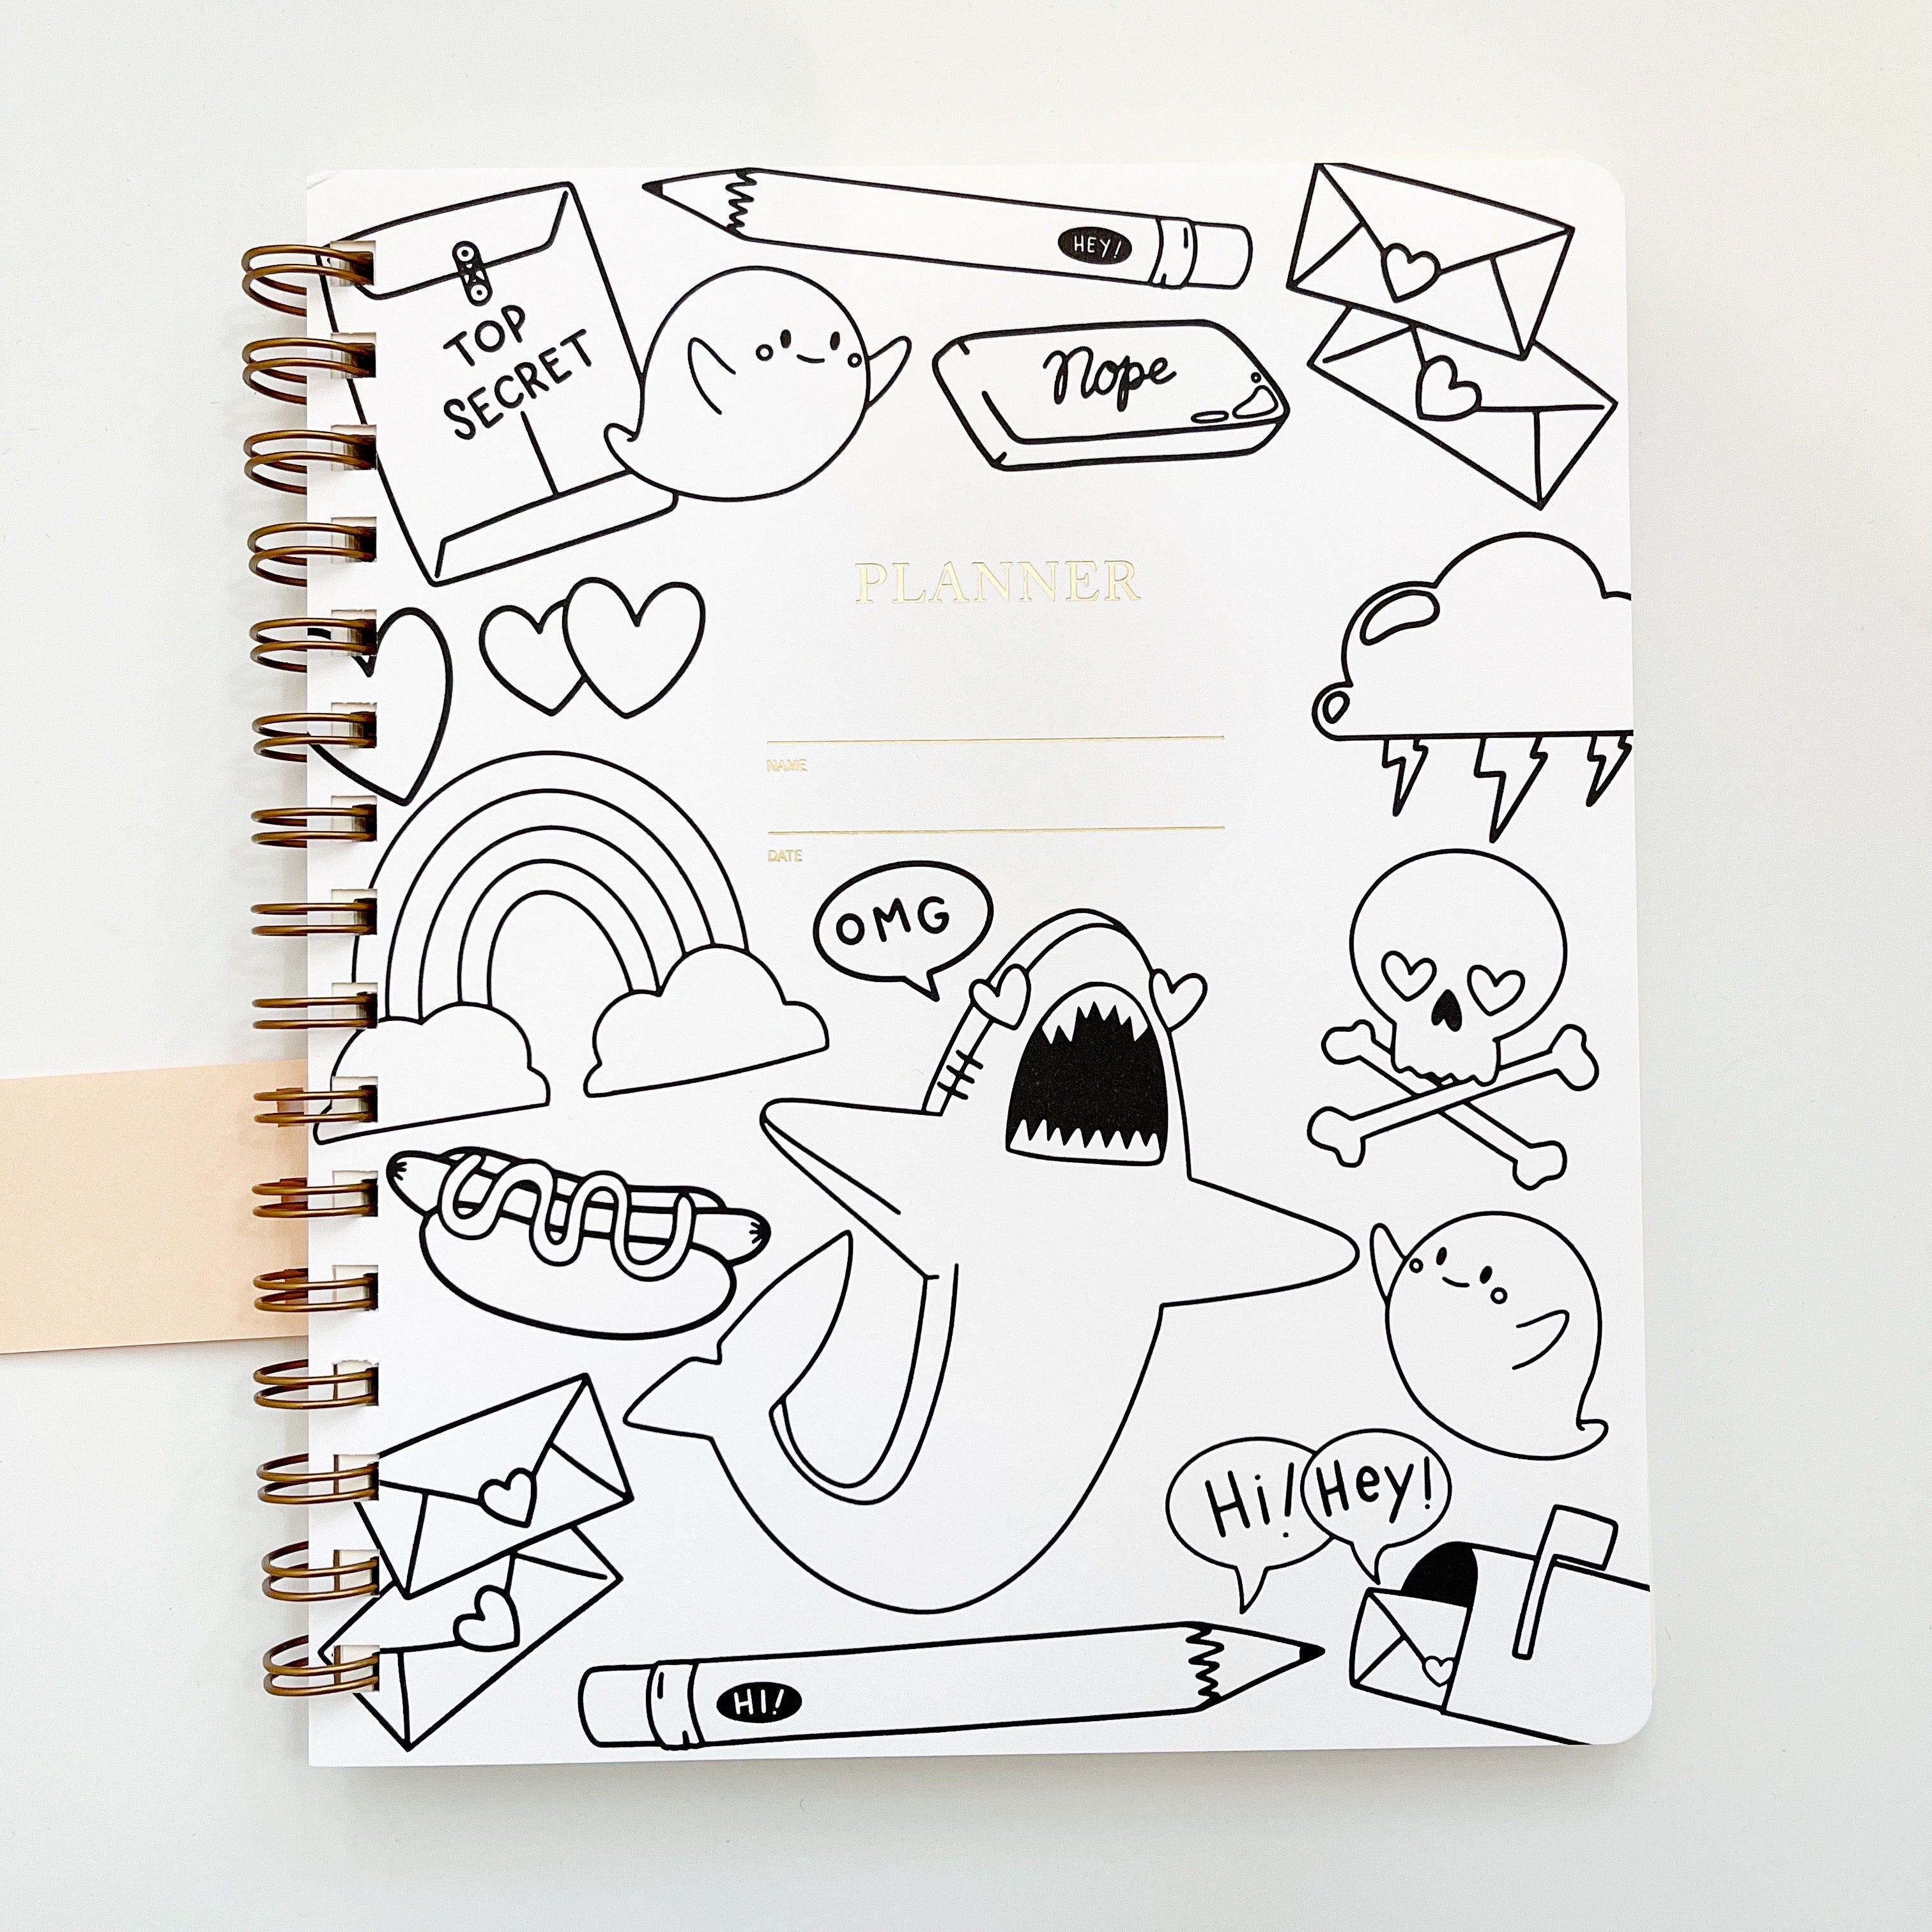 Image of notebook cover with white background and black outlines of shark, cloud, letters, pencil, skull, mailbox, eraser and hot dog.